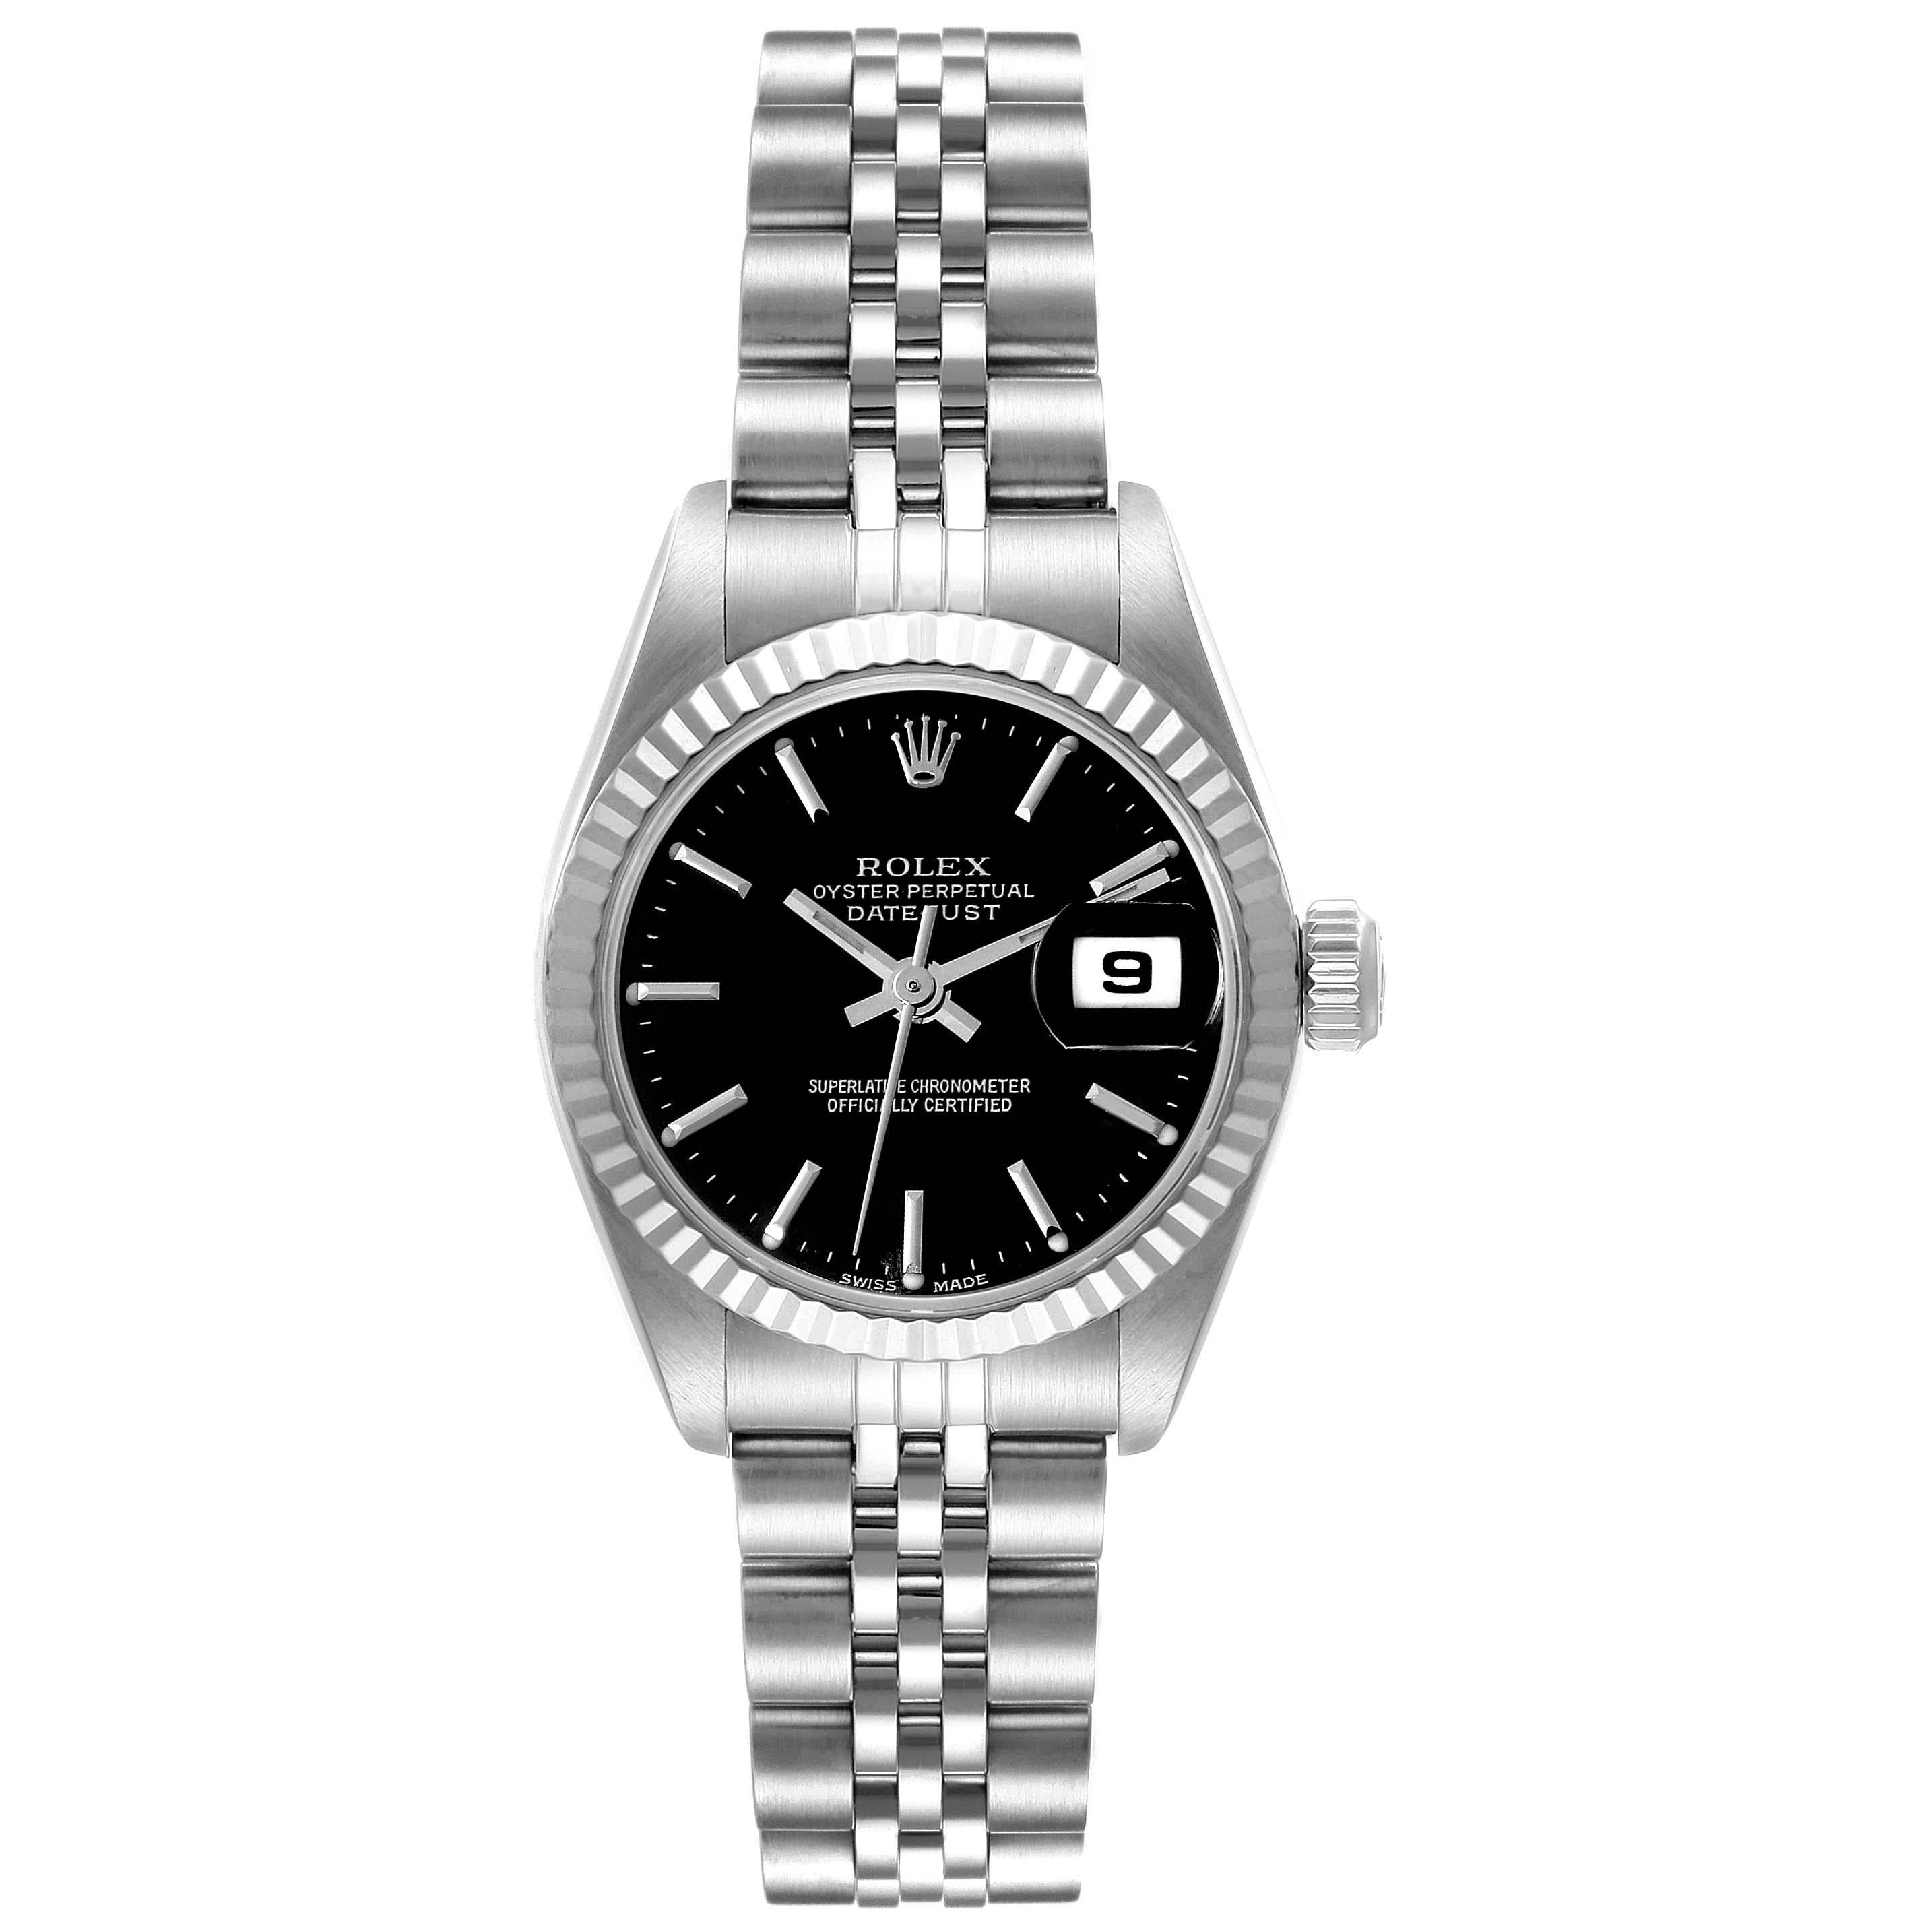 Rolex Datejust 26 Steel White Gold Black Dial Ladies Watch 79174 Box Papers 4